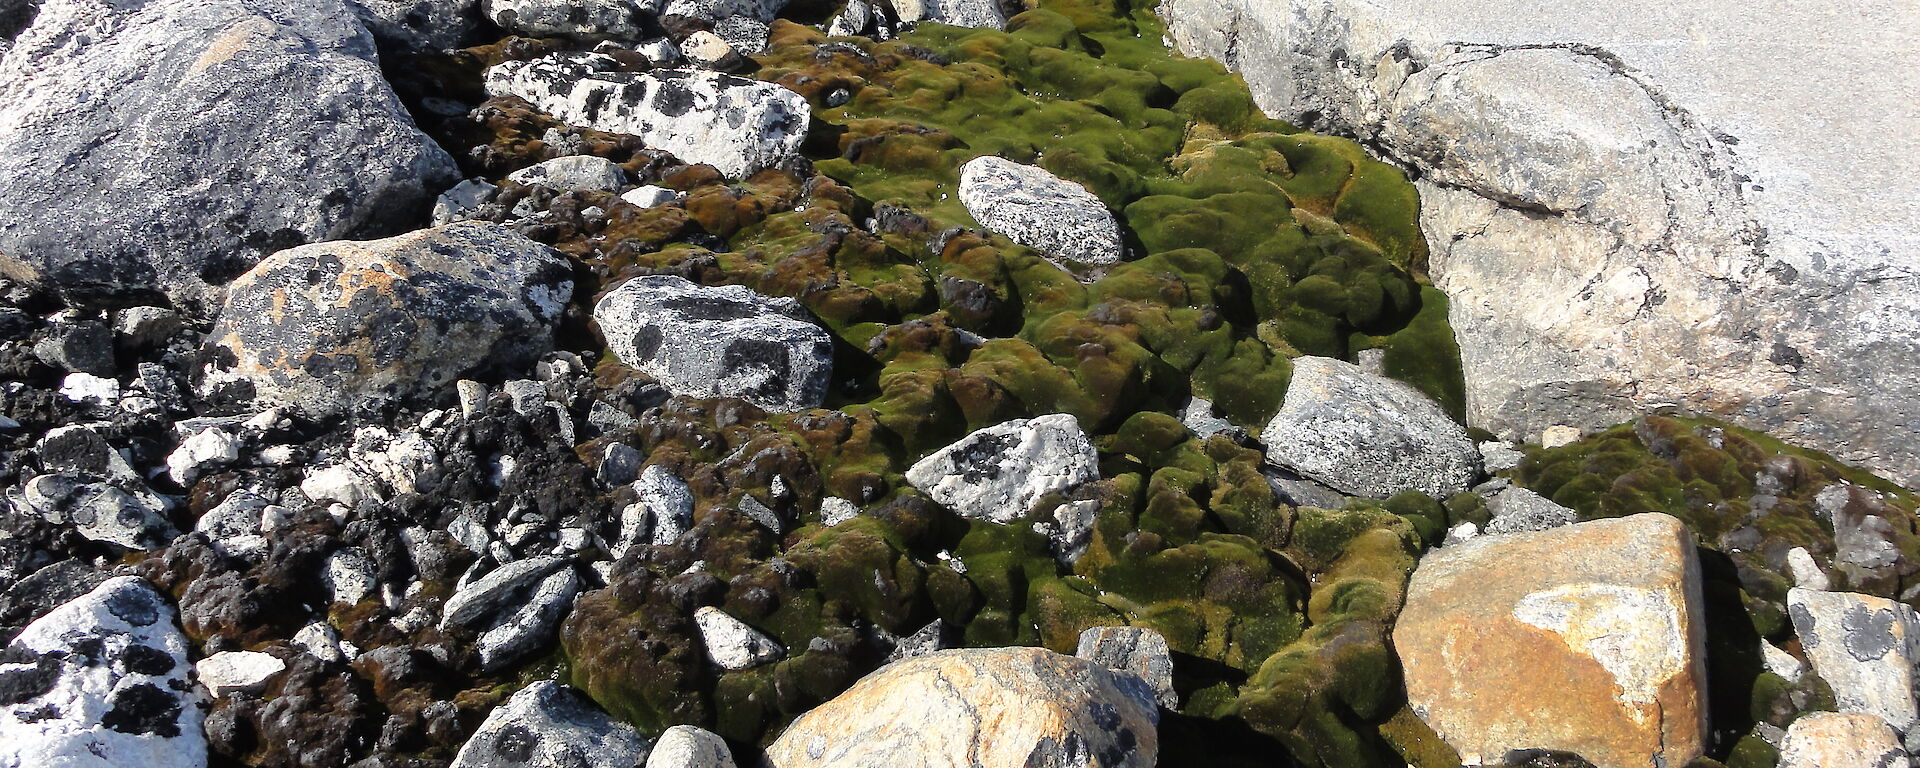 A growth of mosses on rocks near Casey station.